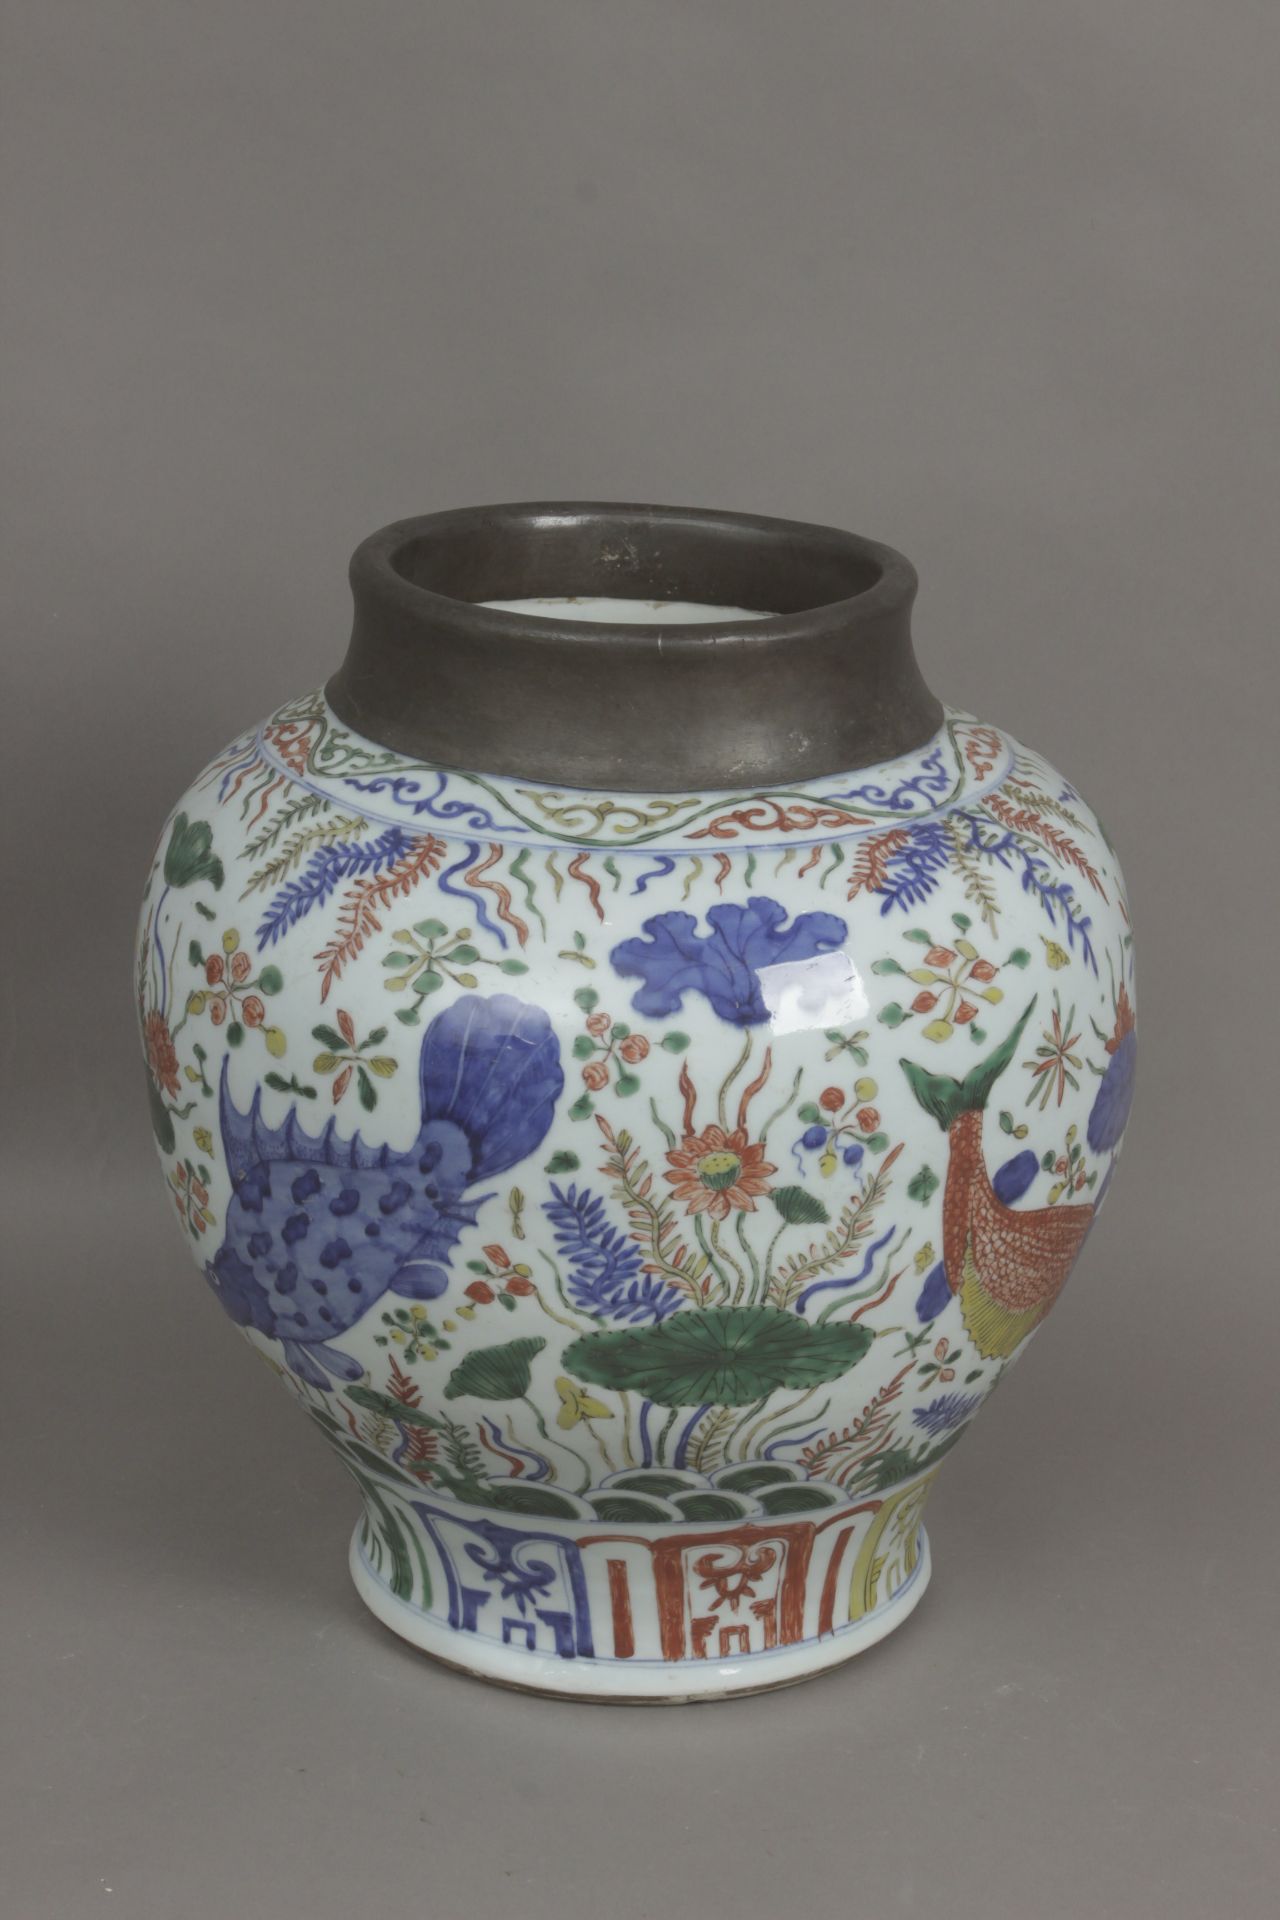 An early 20th century Chinese vase in Doucai porcelain